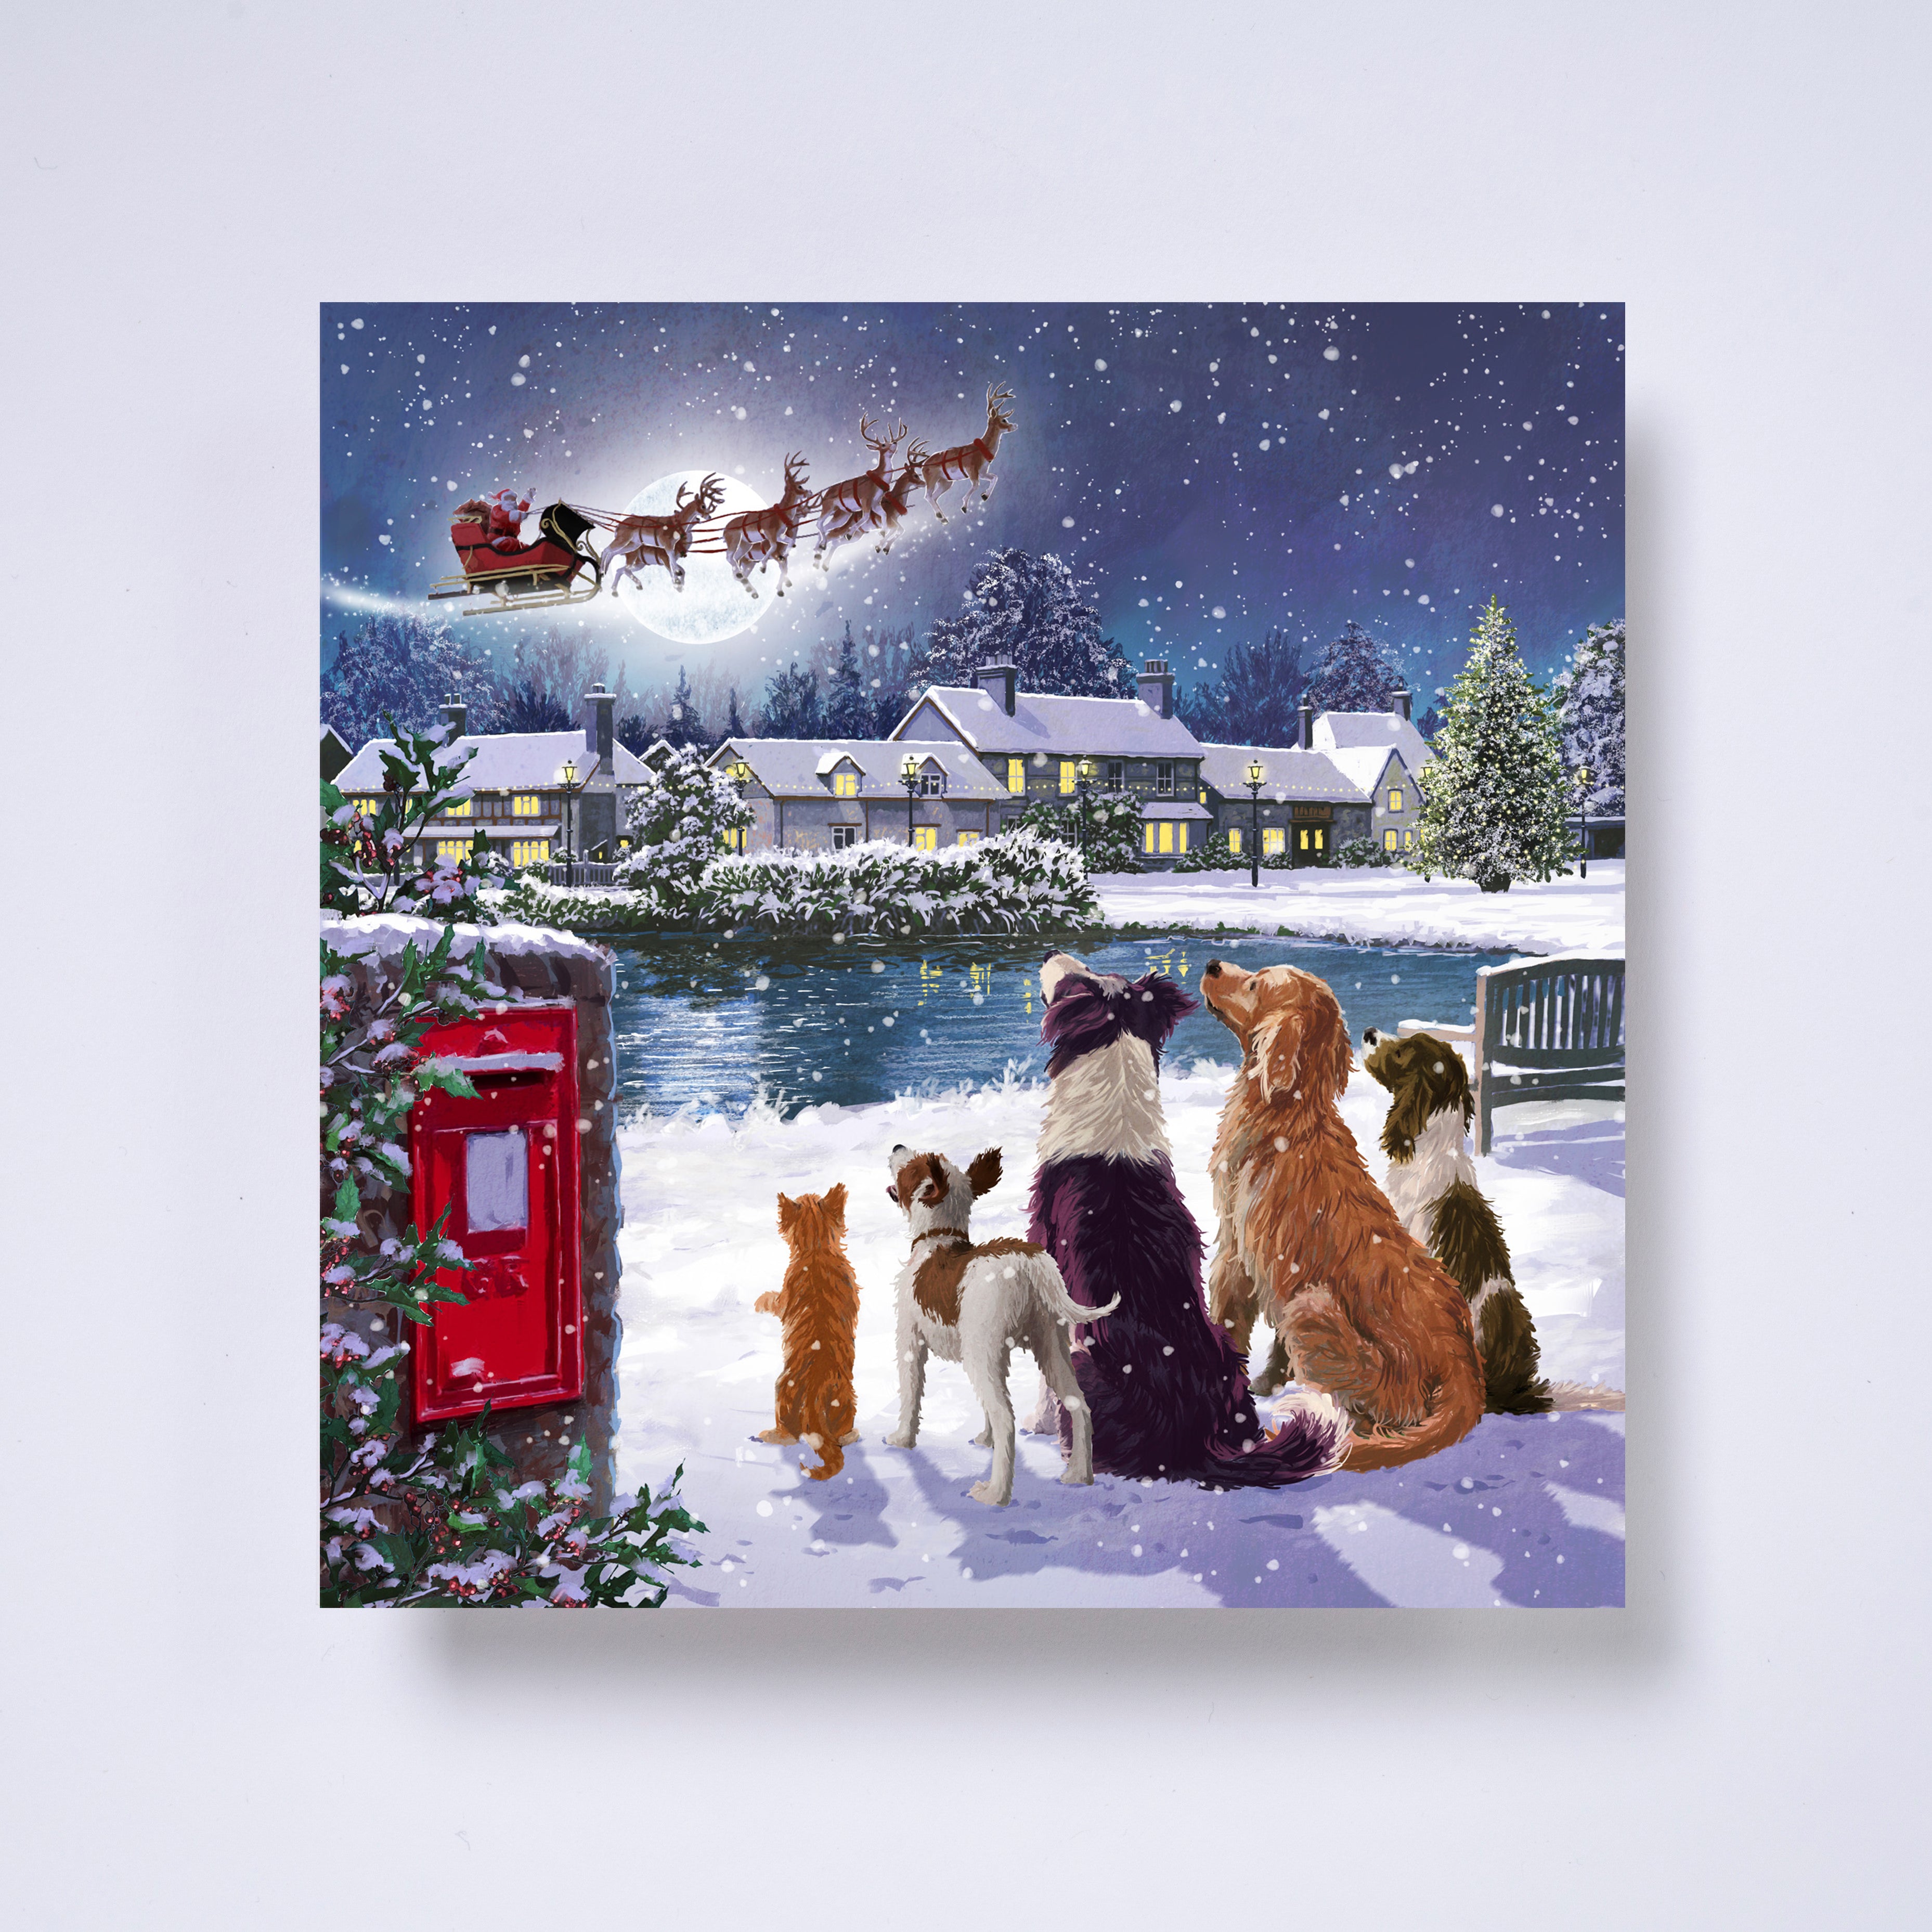 Waiting for Santa - pack of 10 charity Christmas cards with envelopes